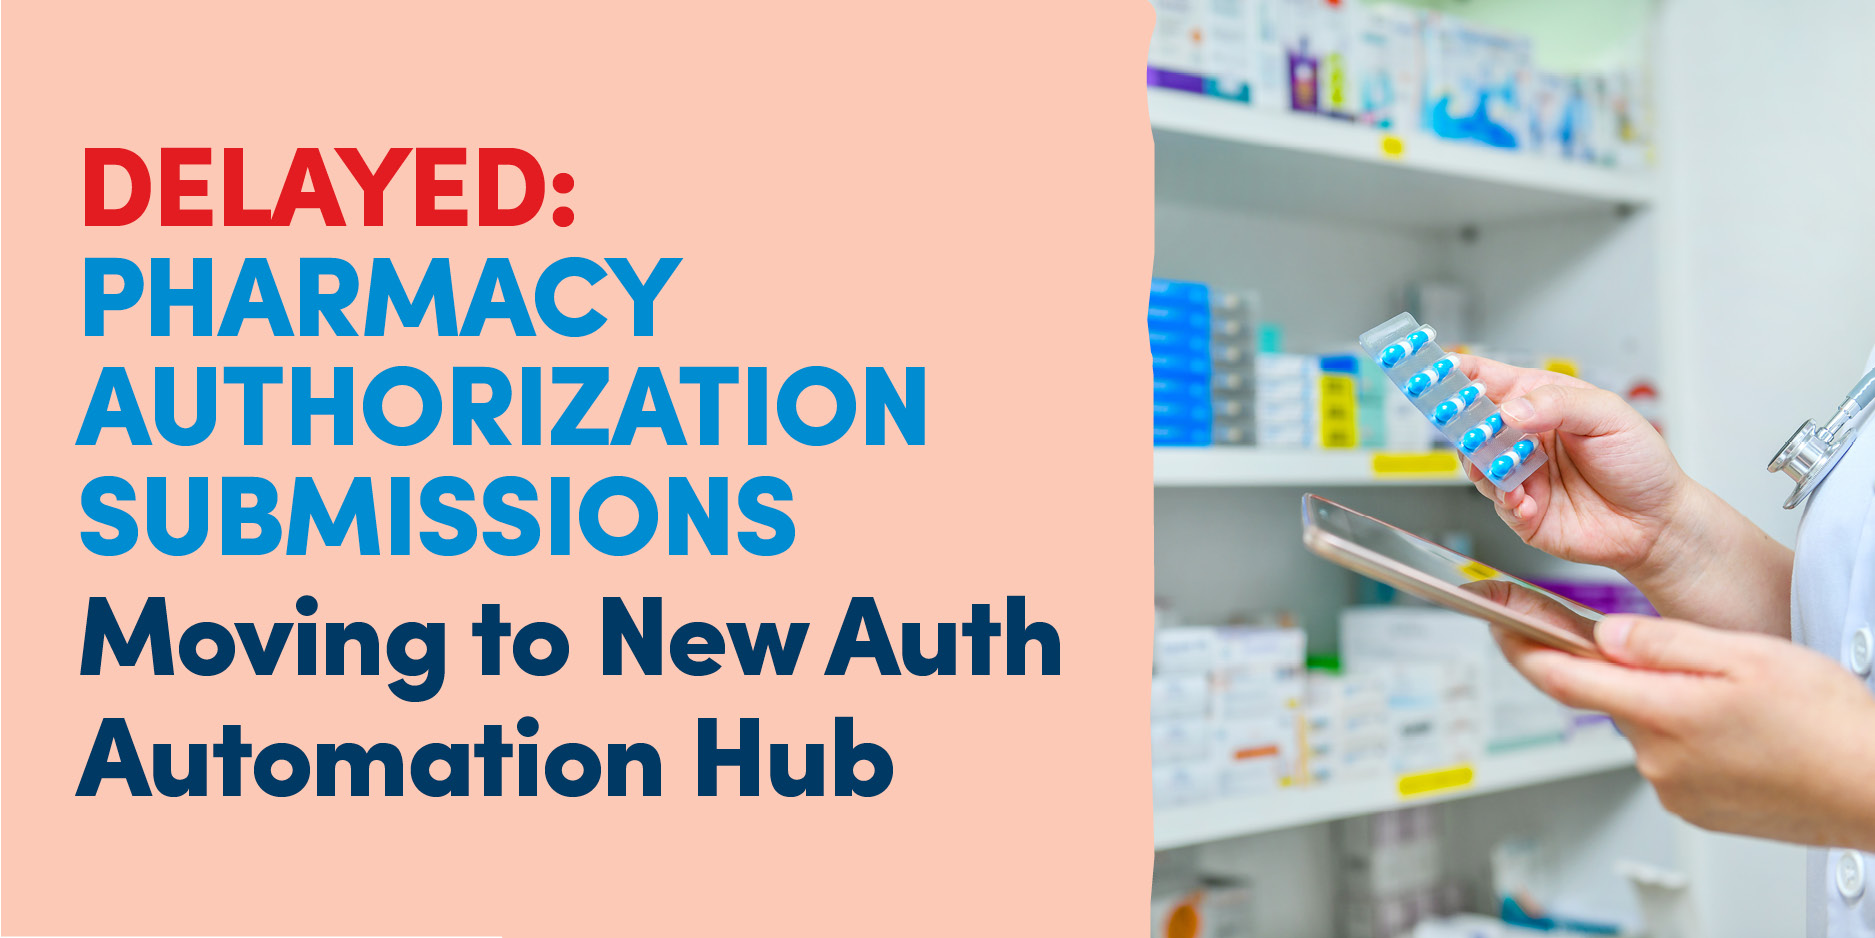 DELAYED: Pharmacy Authorization Submissions Moving to New Auth Automation Hub